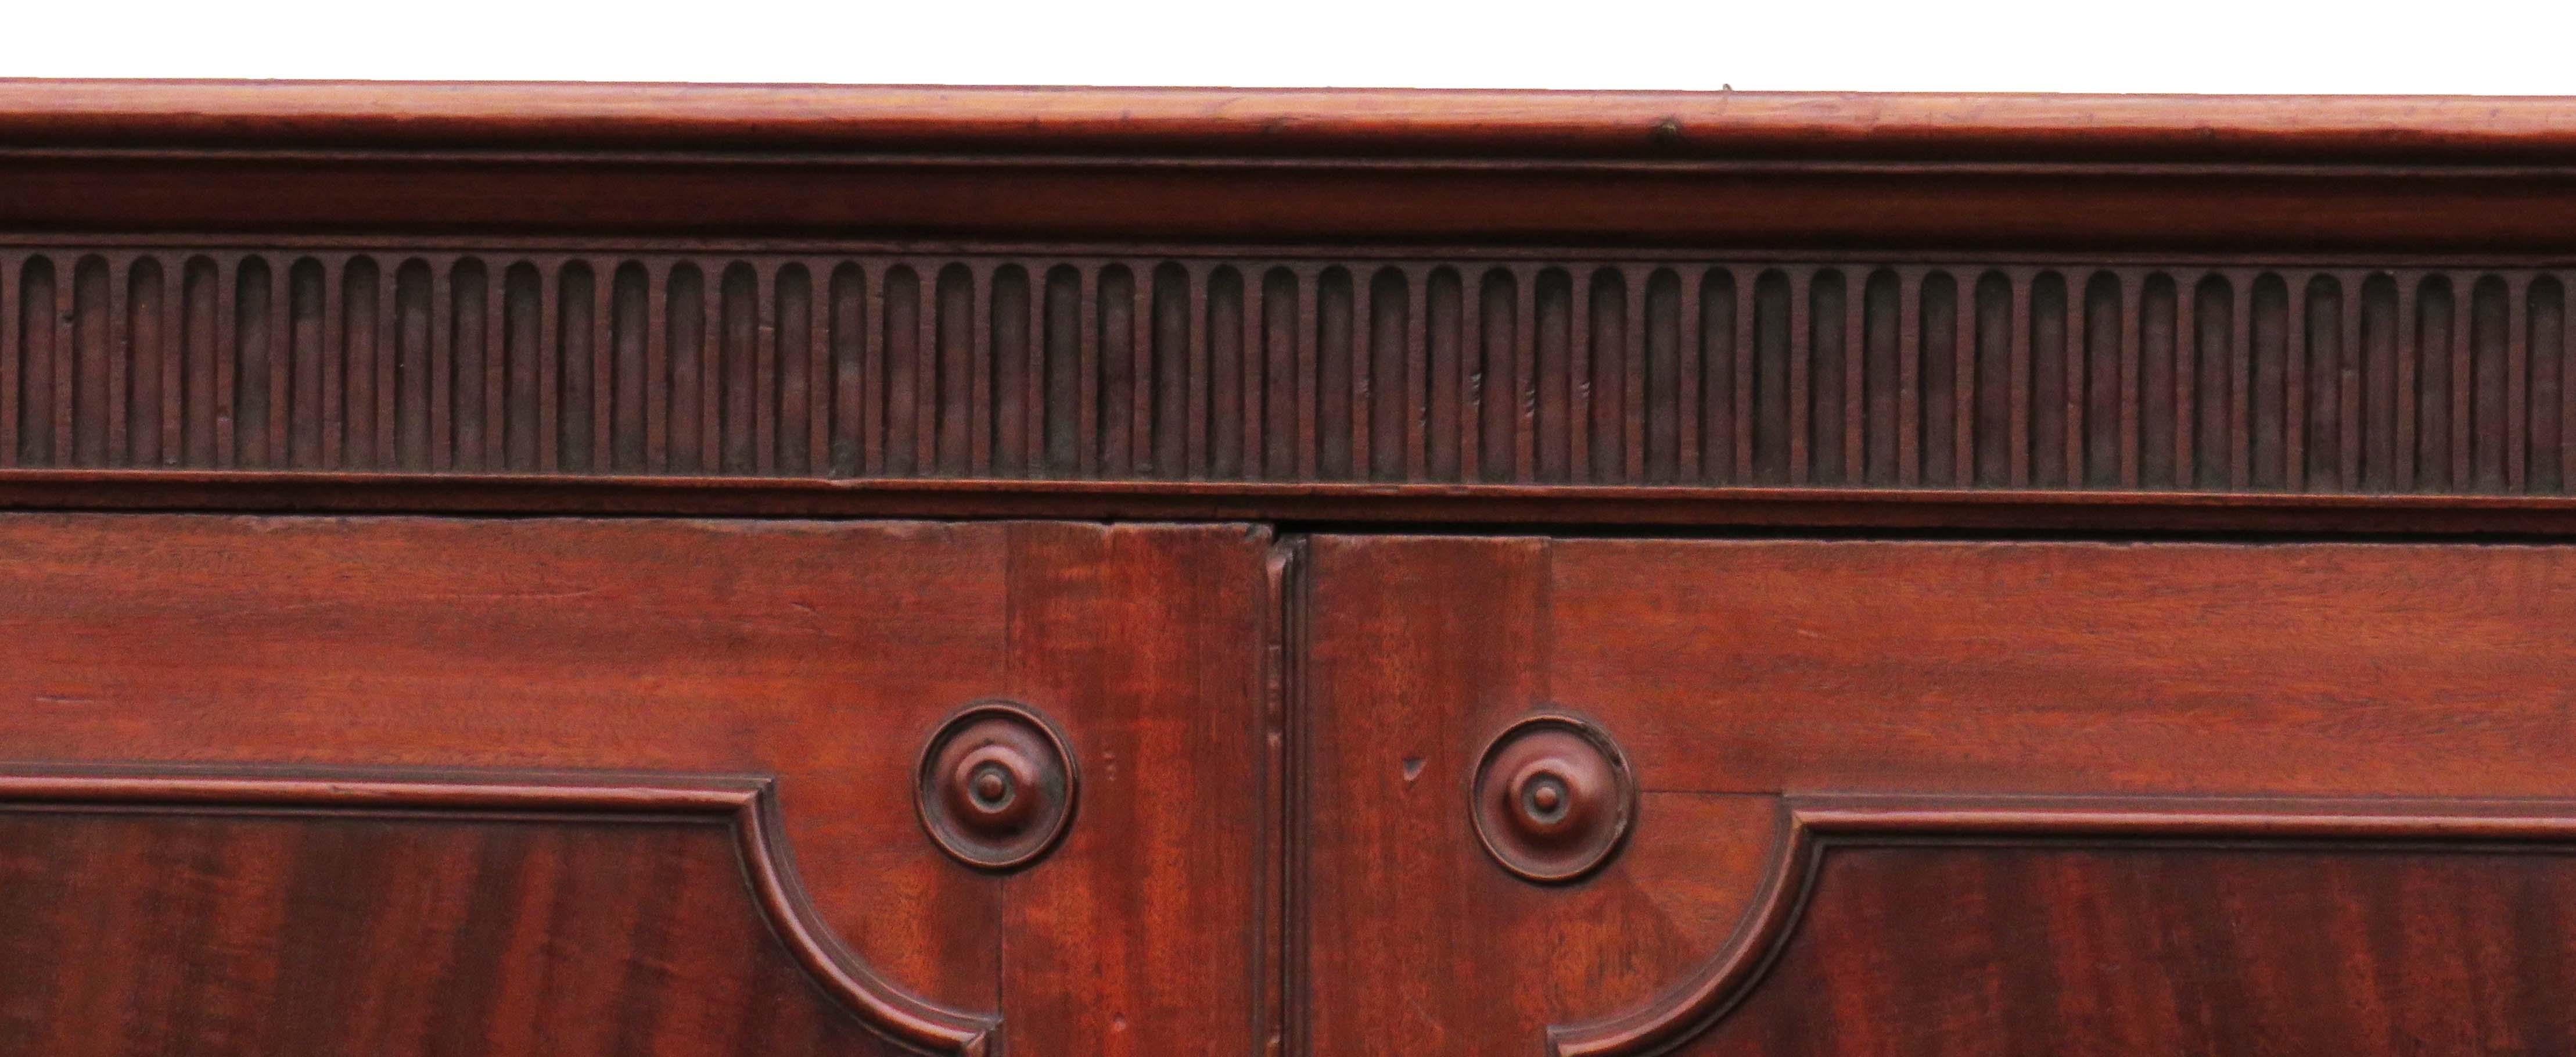 An excellent quality 18th century Georgian mahogany linen
Press having elegant fluted cornice over superbly figured
Pair of panelled doors enclosing original cedar lined sliding
Trays above two short and two long drawers retaining
Original brass